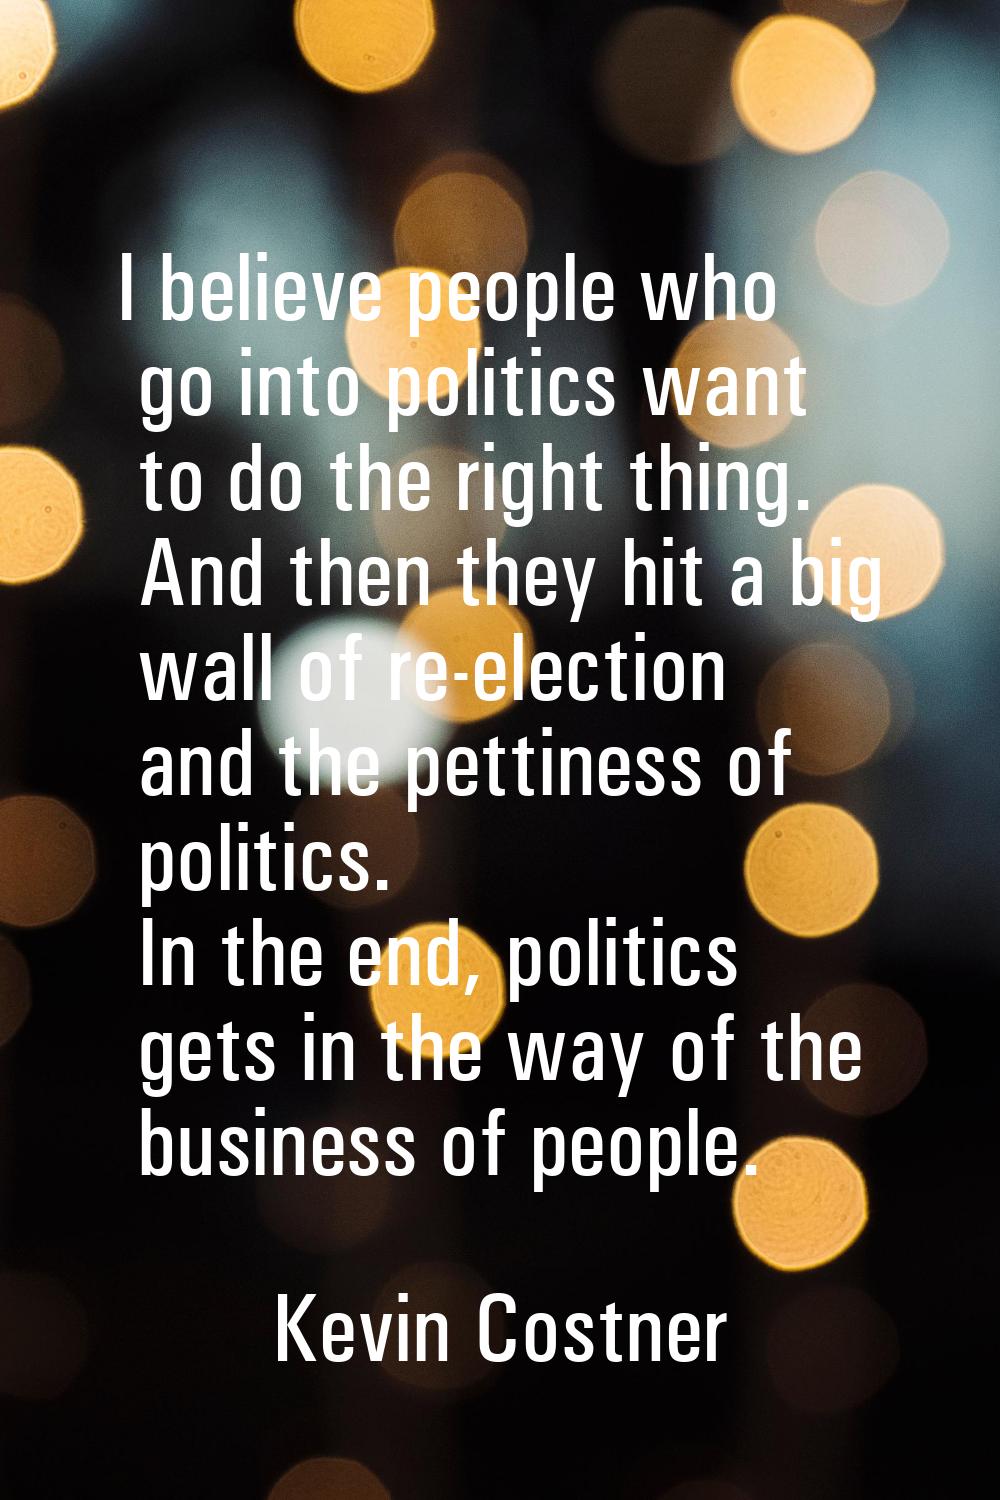 I believe people who go into politics want to do the right thing. And then they hit a big wall of r